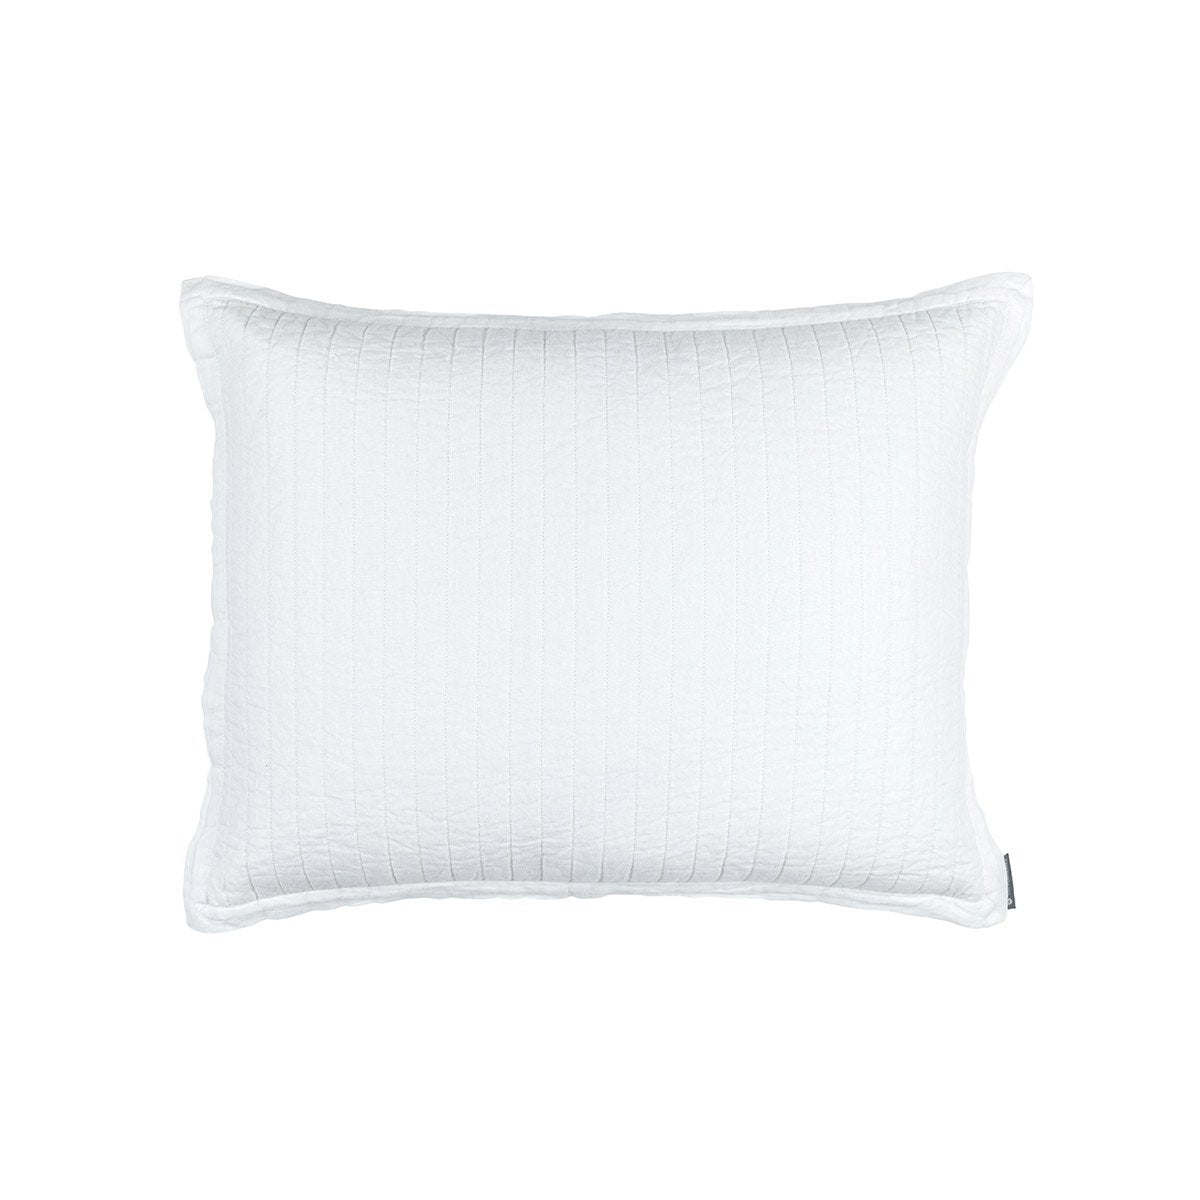 Fig Linens - Lili Alessandra Bedding - Tessa White Quilted Standard Pillow 